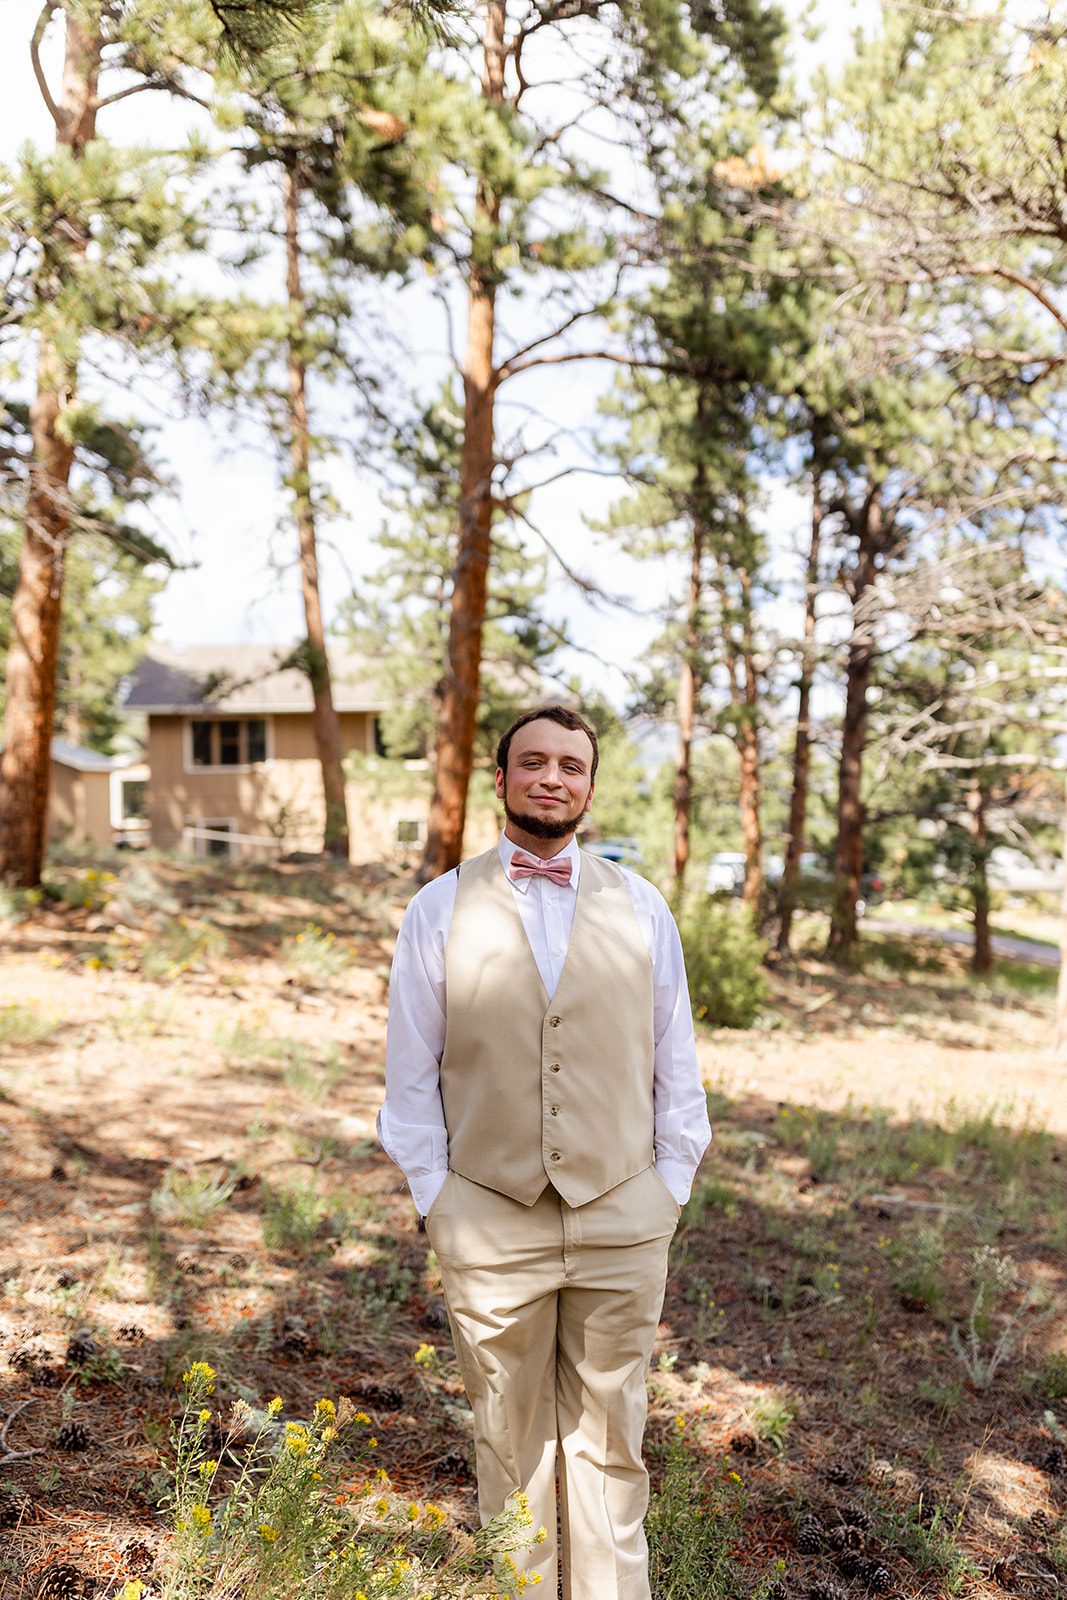 The groom, wearing a tan suit waits patiently for a first look with his bride. 